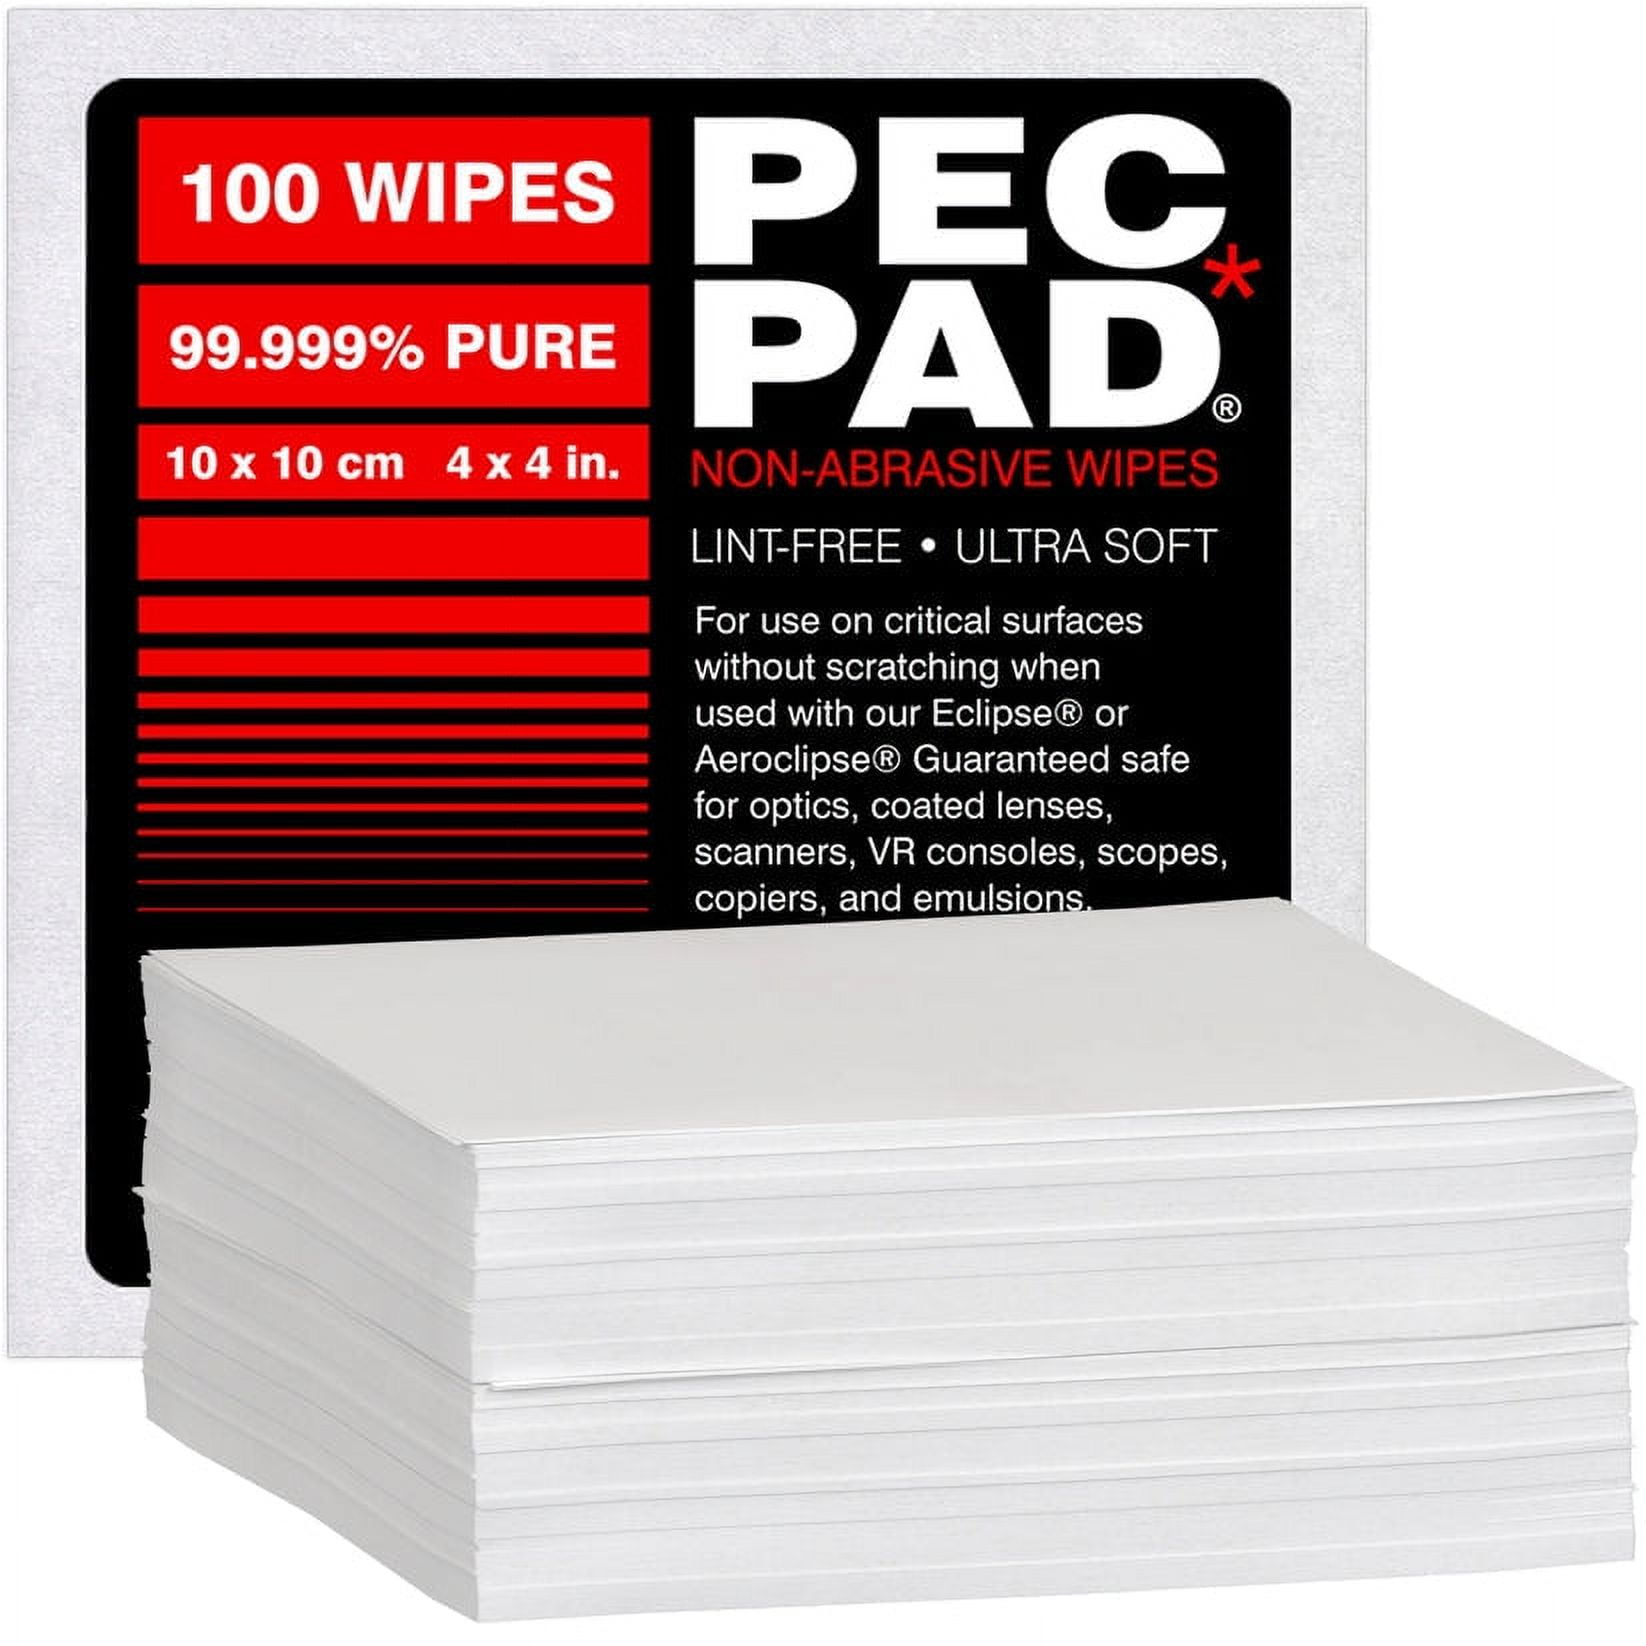 PEC-PAD Lint Free Wipes 4”x4” Non-Abrasive Ultra Soft Cloth for Cleaning  Sensitive Surfaces Like Camera, Lens, Filters, Film, Scanners, Telescopes,  Microscopes, Binoculars. (100 Sheets Per/Pkg) 